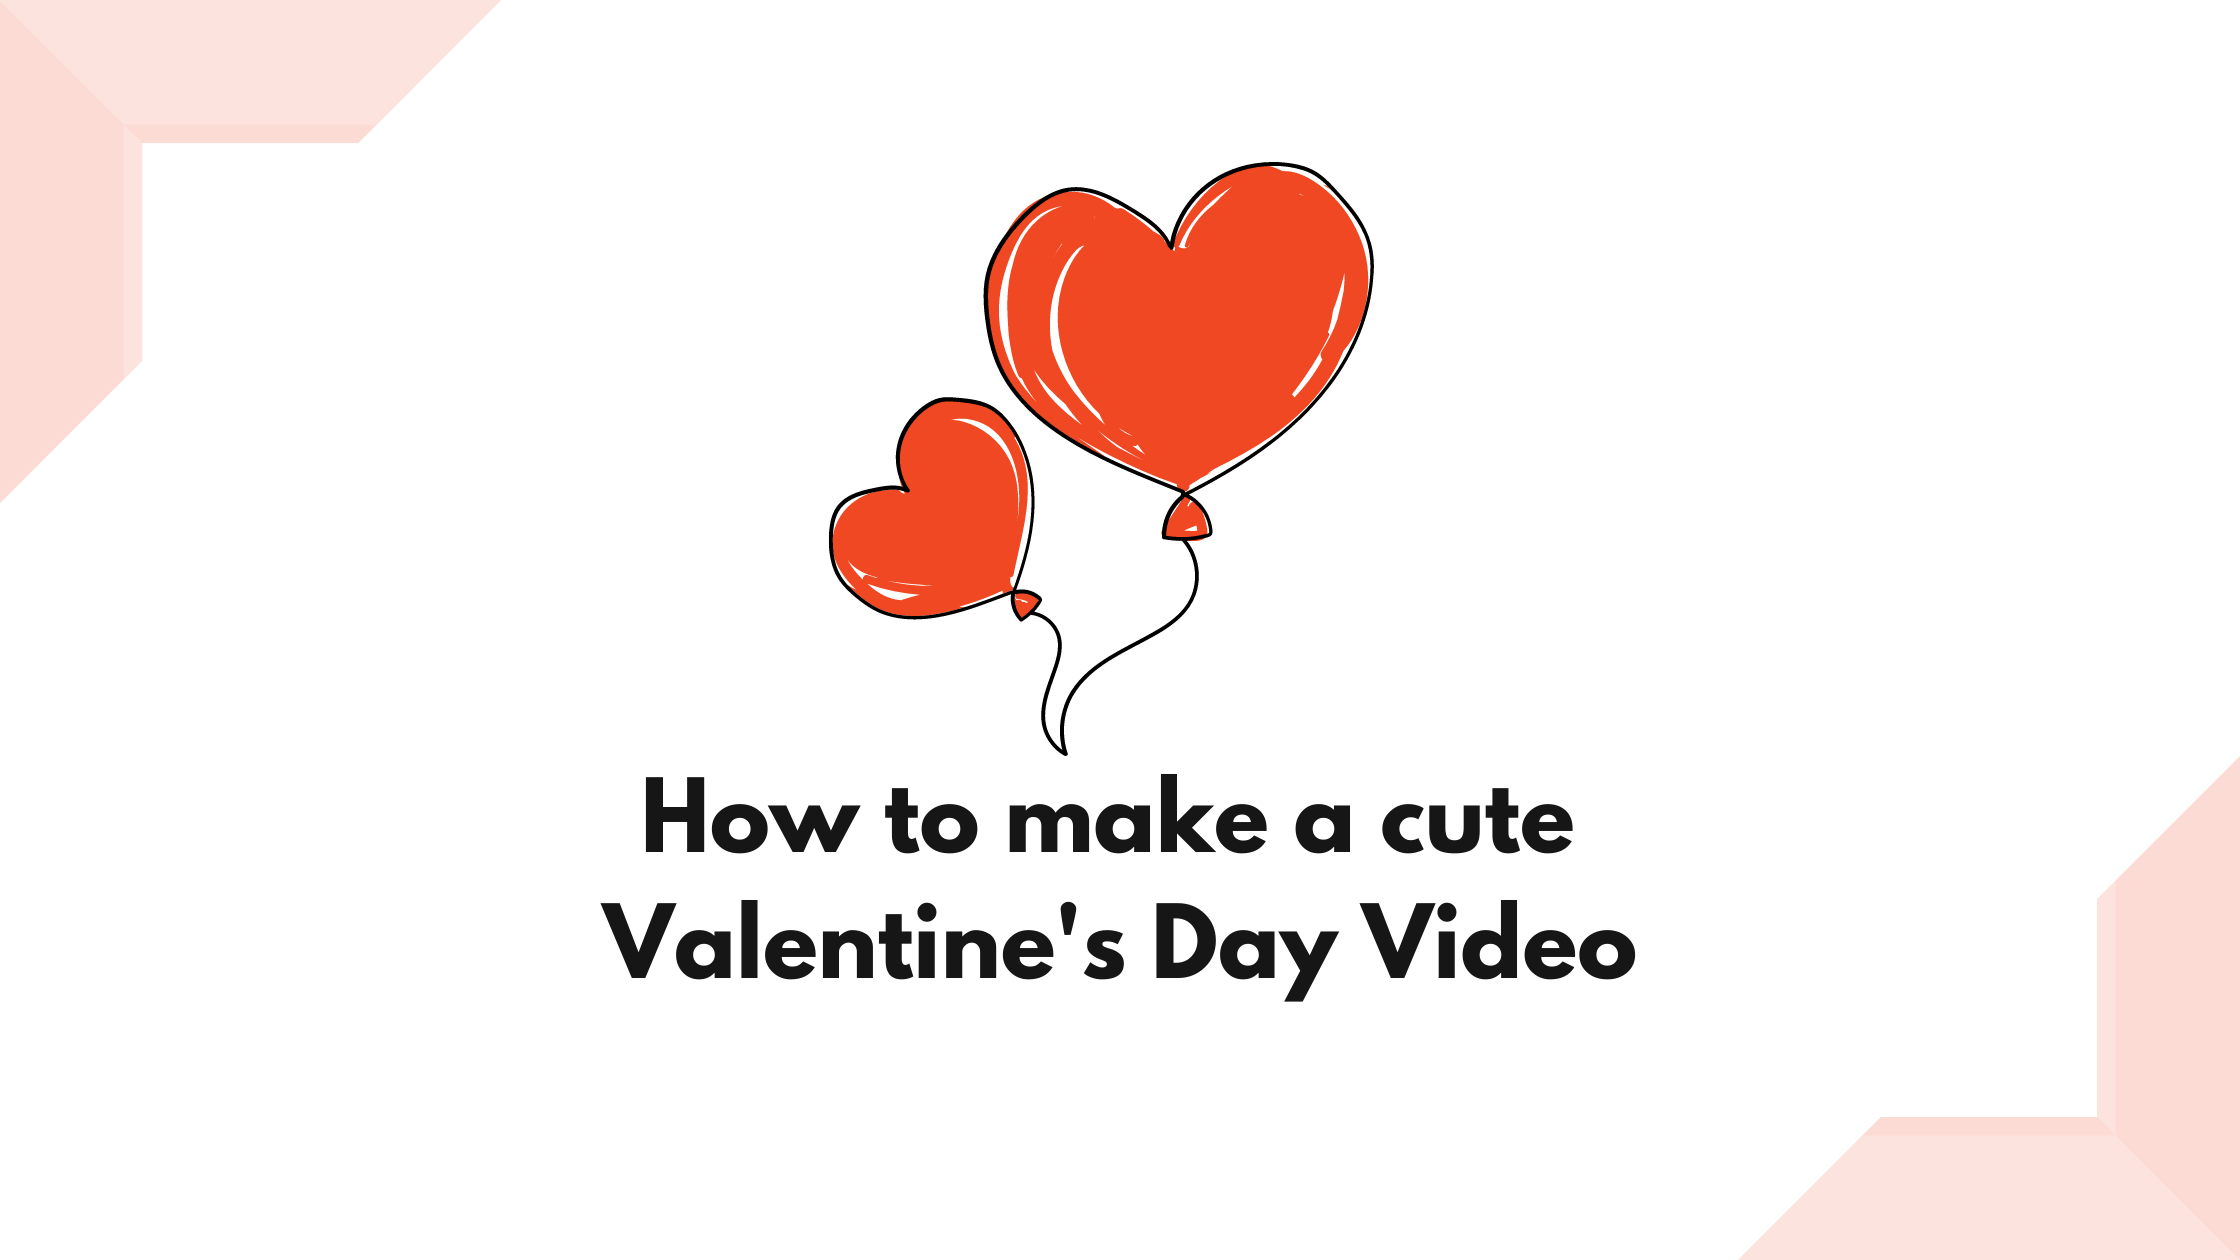  Valentine's day video maker | 100+ Templates [It's Free]